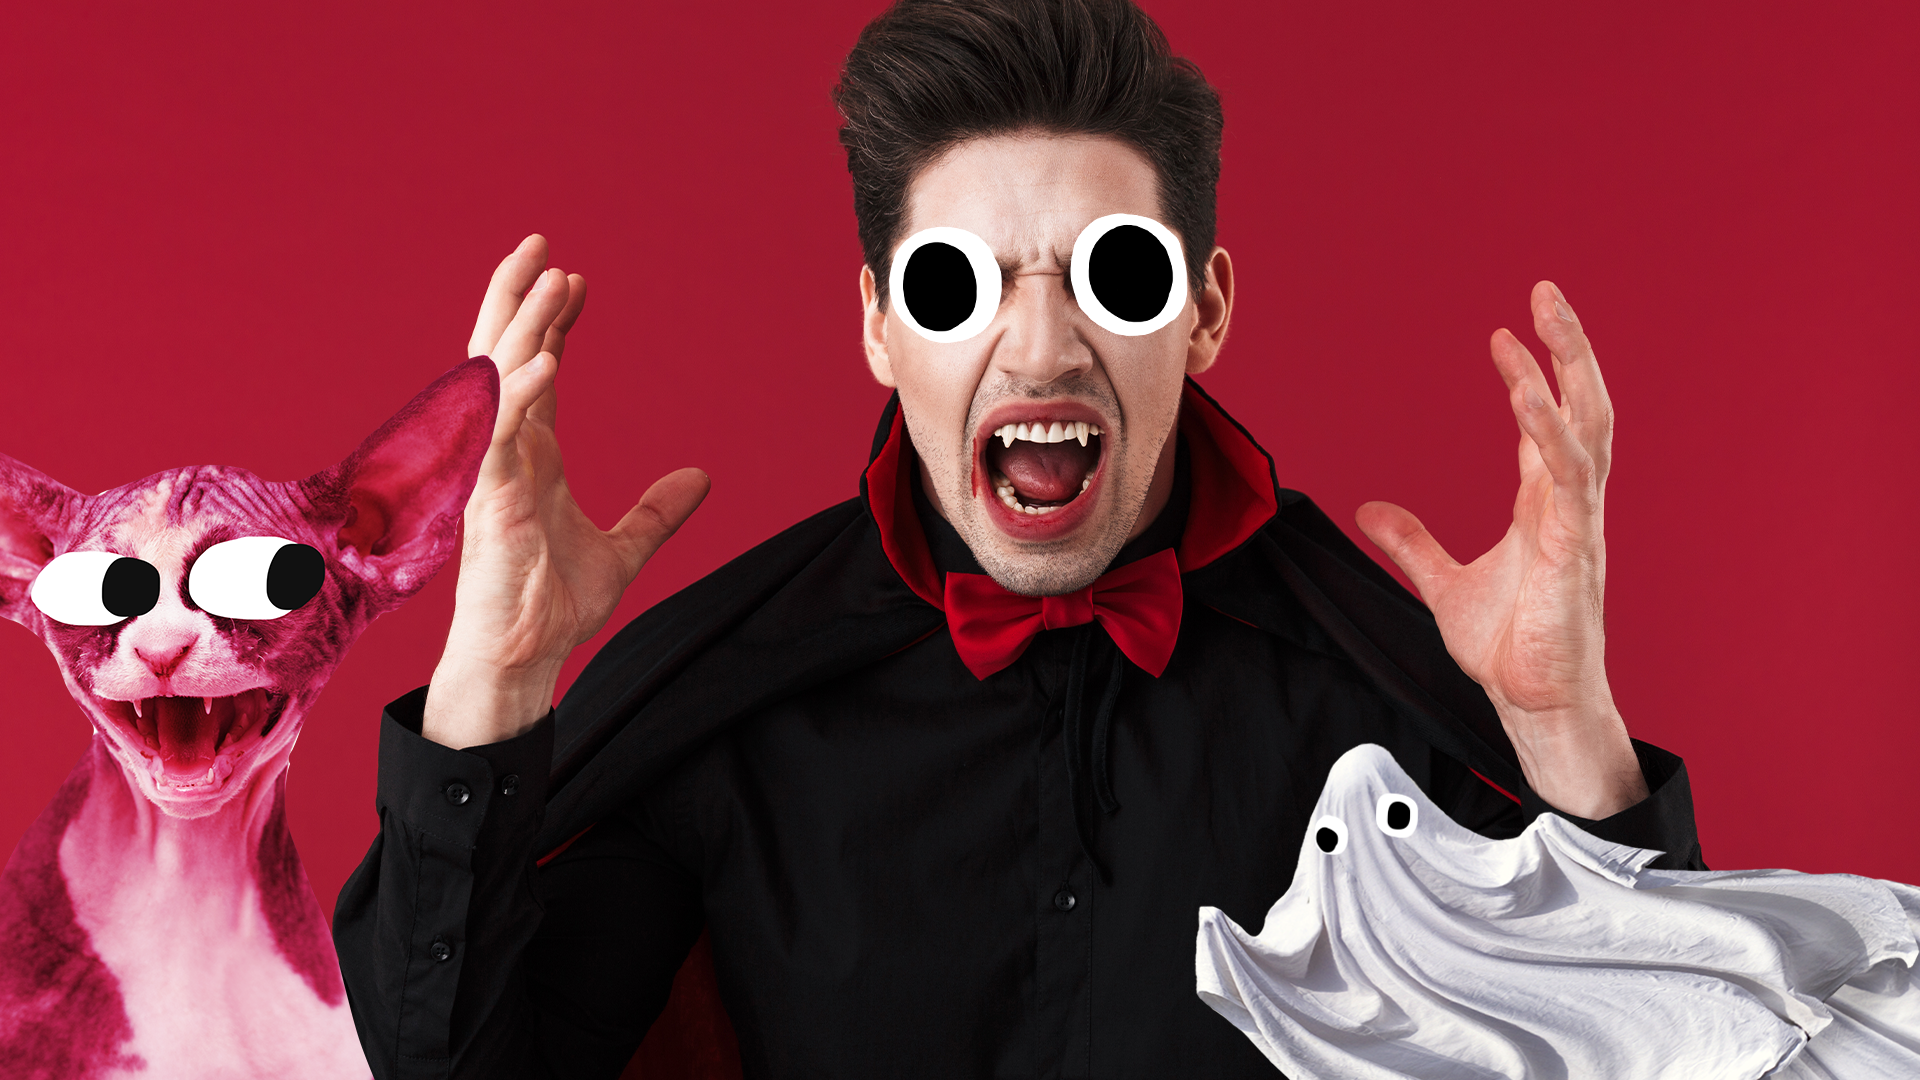 Vampire on red background with Beano golin and ghost